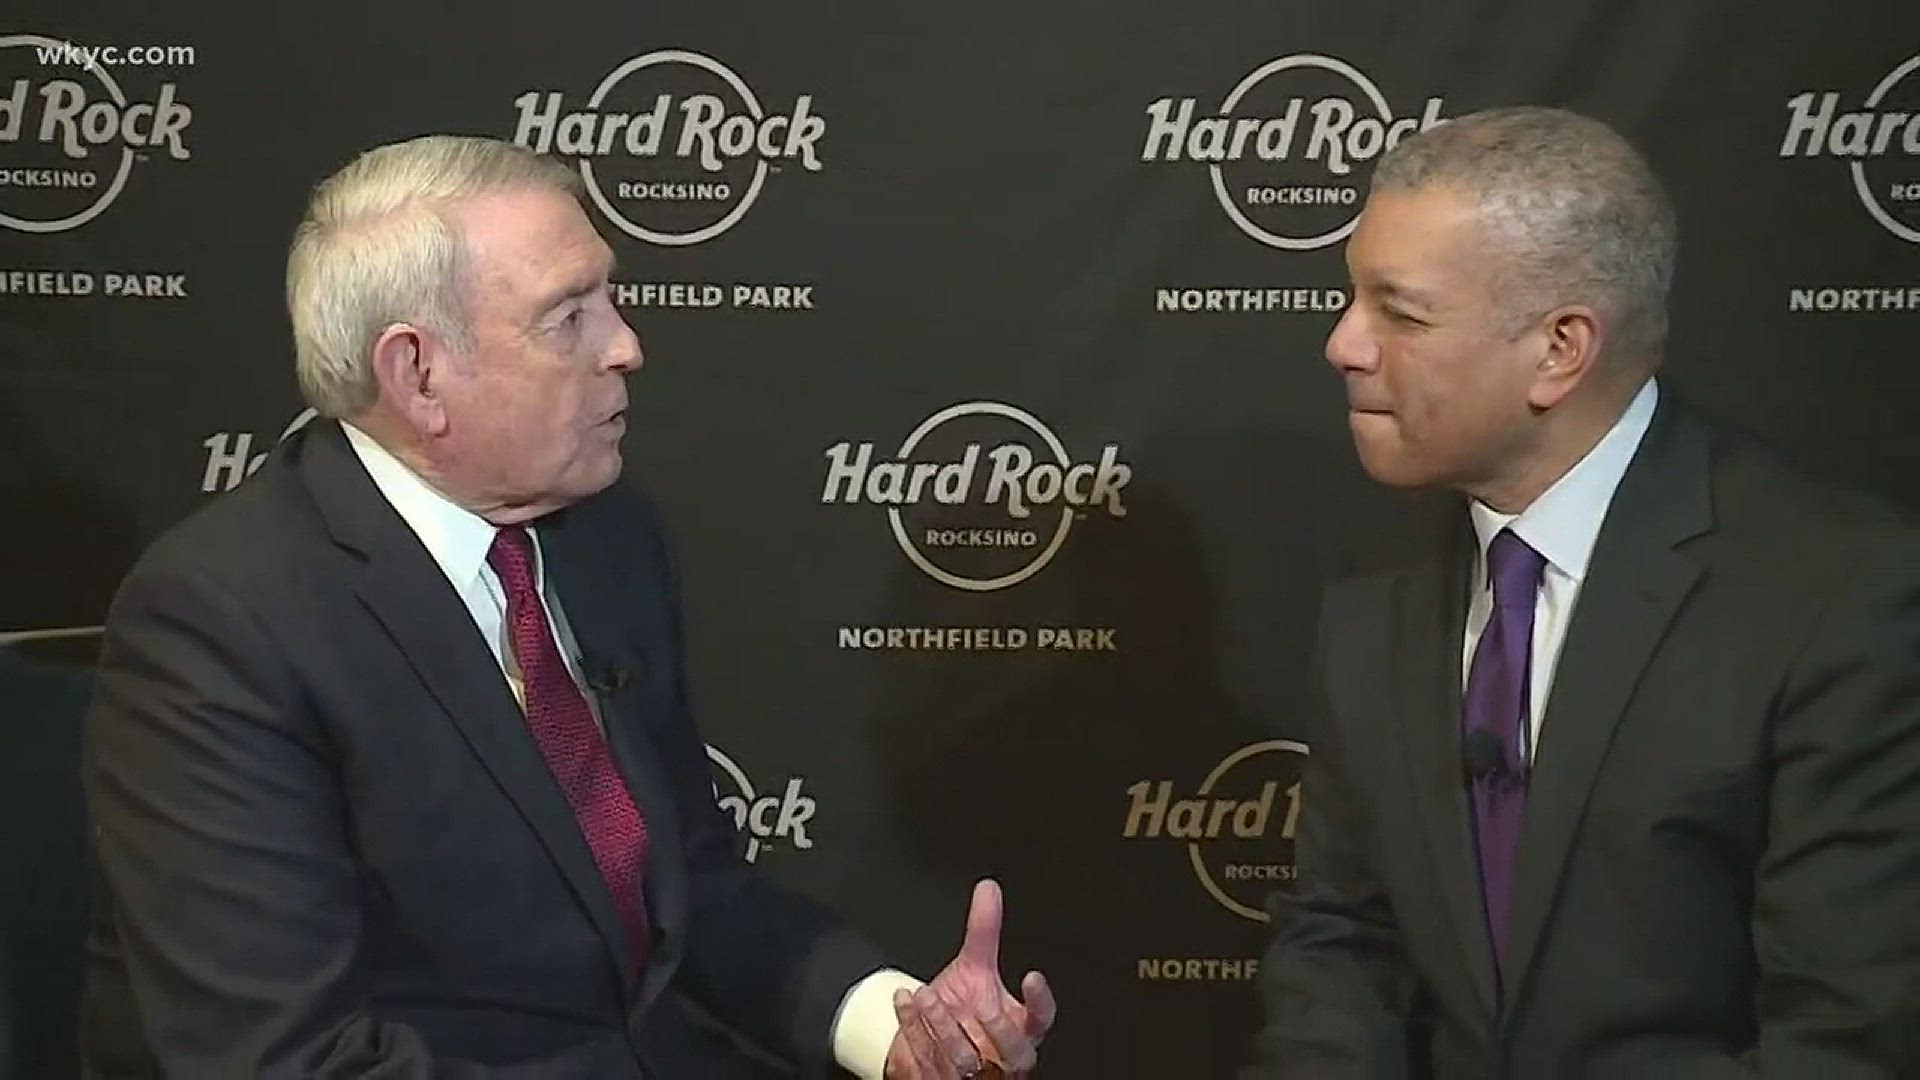 WKYC's Russ Mitchel catches up with former CBS colleague Dan Rather